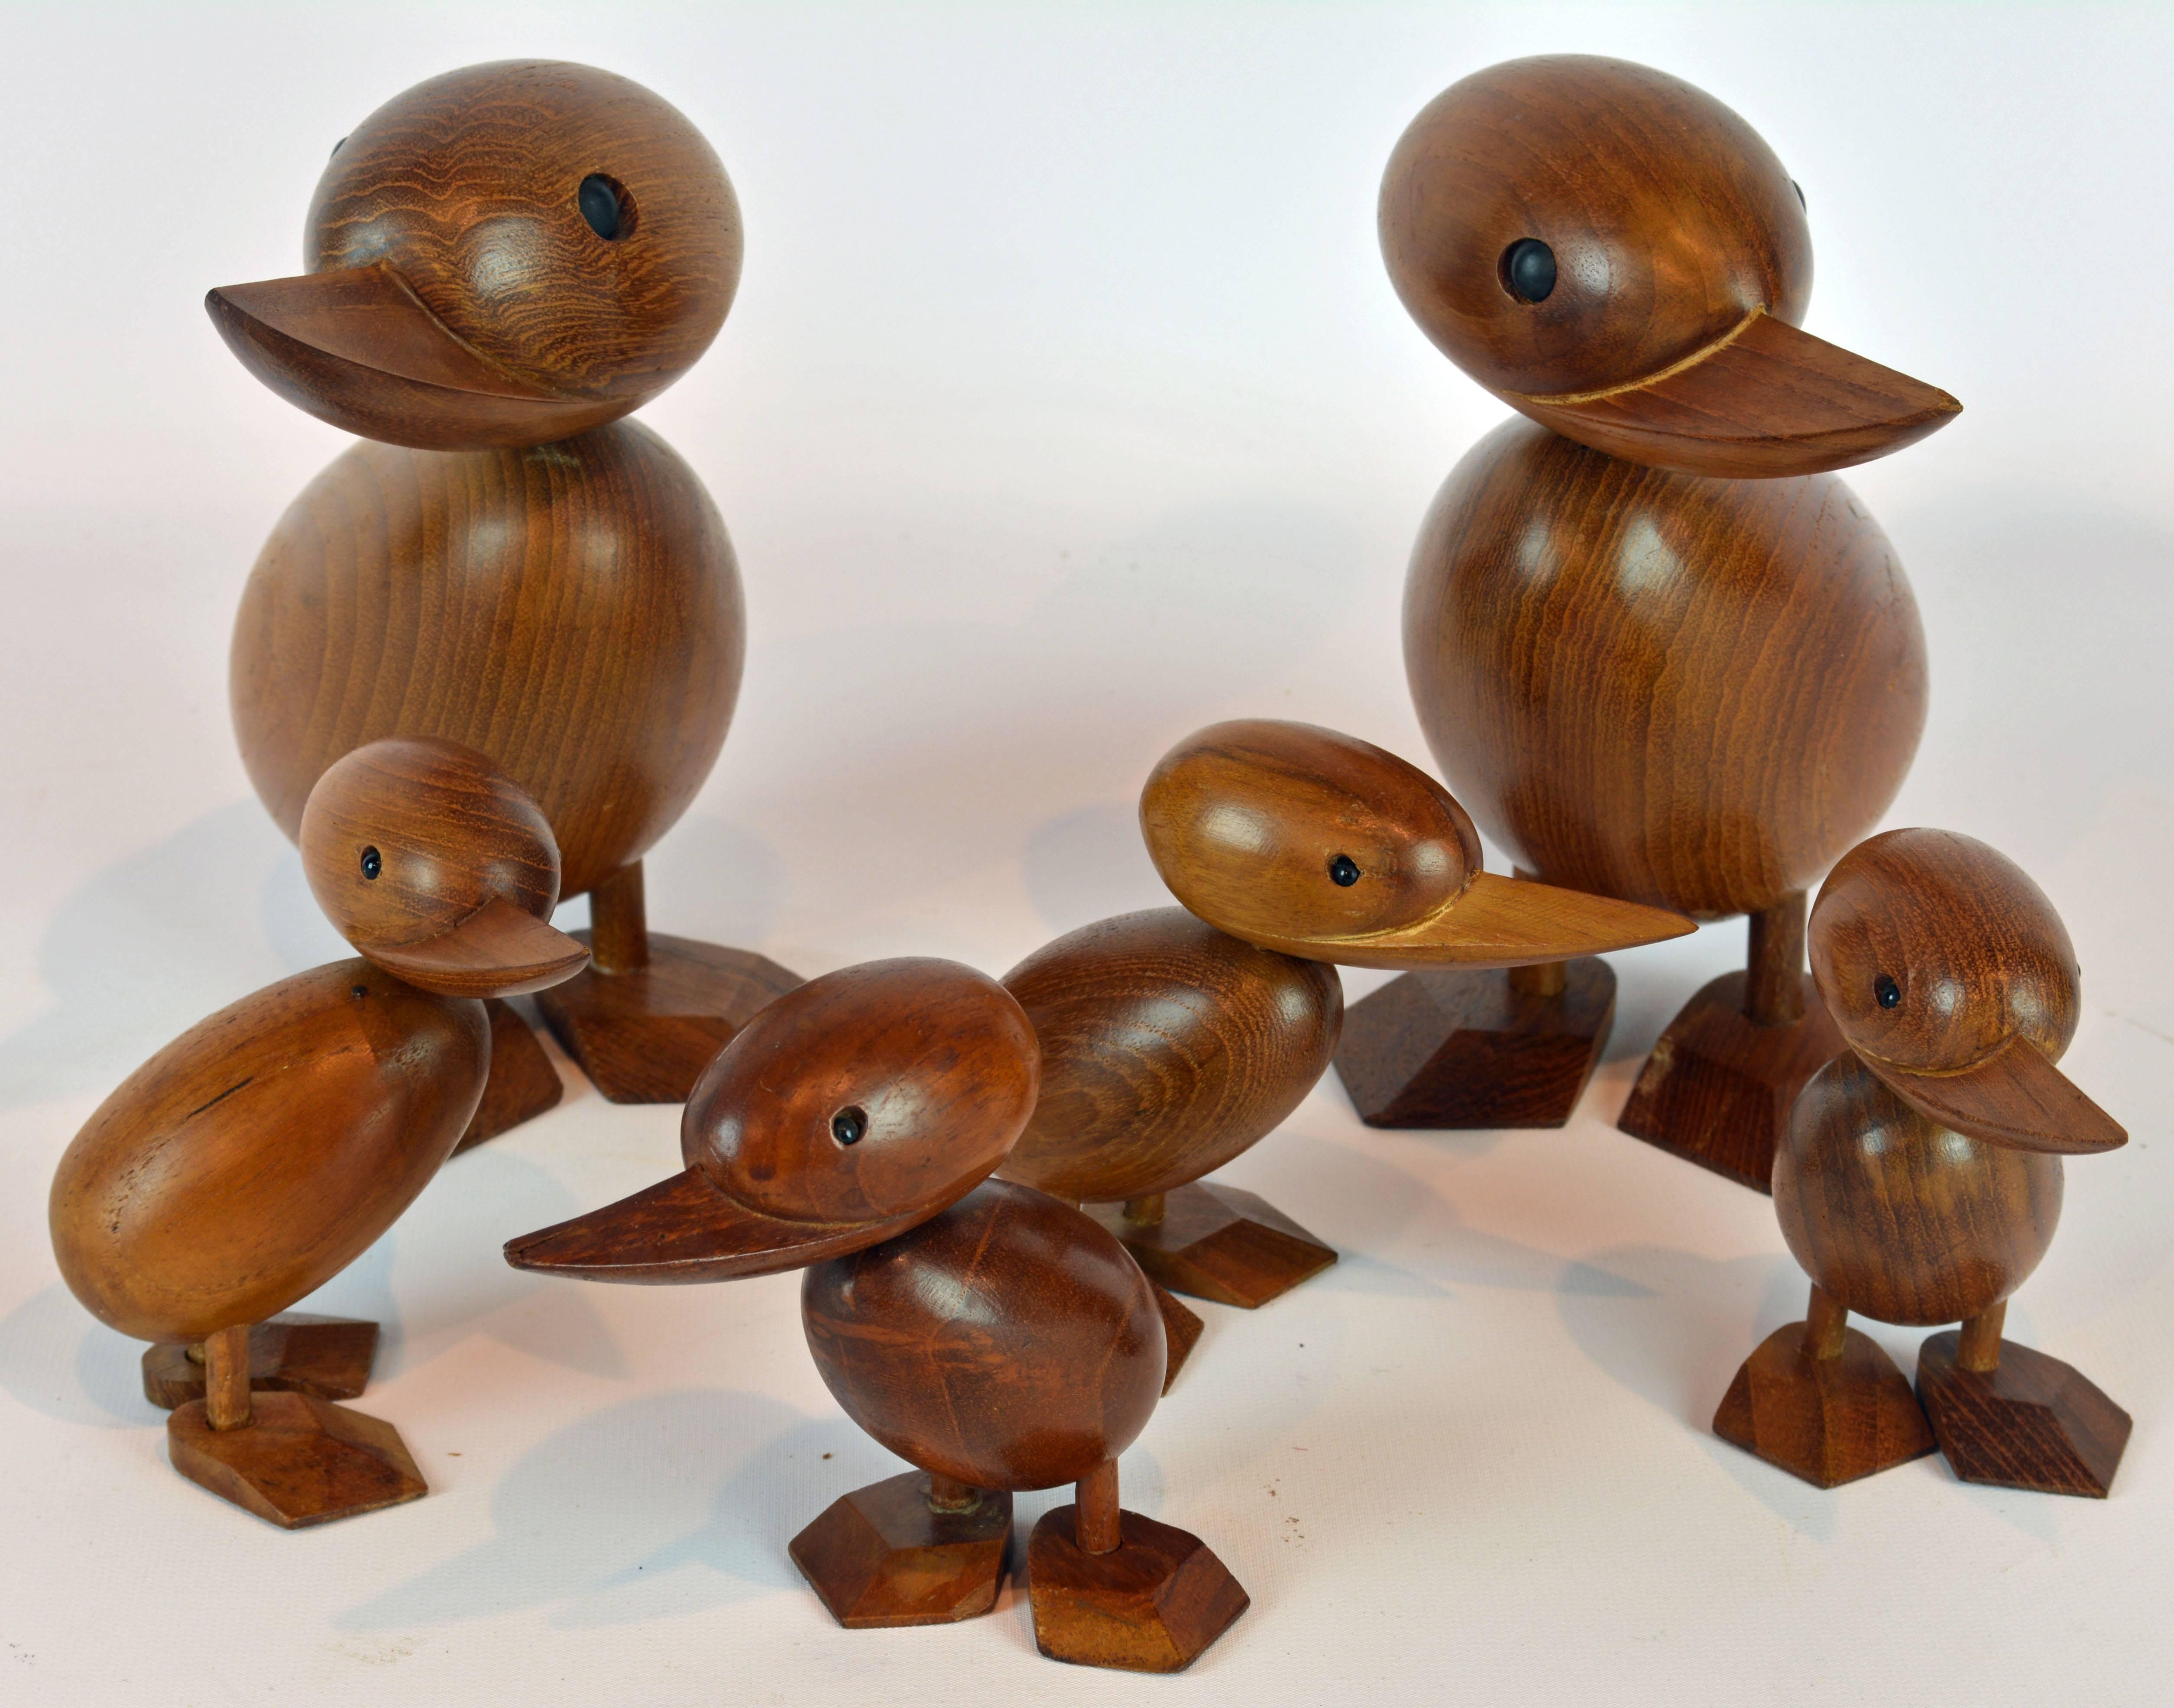 Designed by Hans Bolling, Denmark, these iconic ducks likely from the 1960s are handmade of teak wood with beautiful grain and have black shiny eyes. The larger ducks Stand 7.25 inches tall and the smaller 4.25 inches.